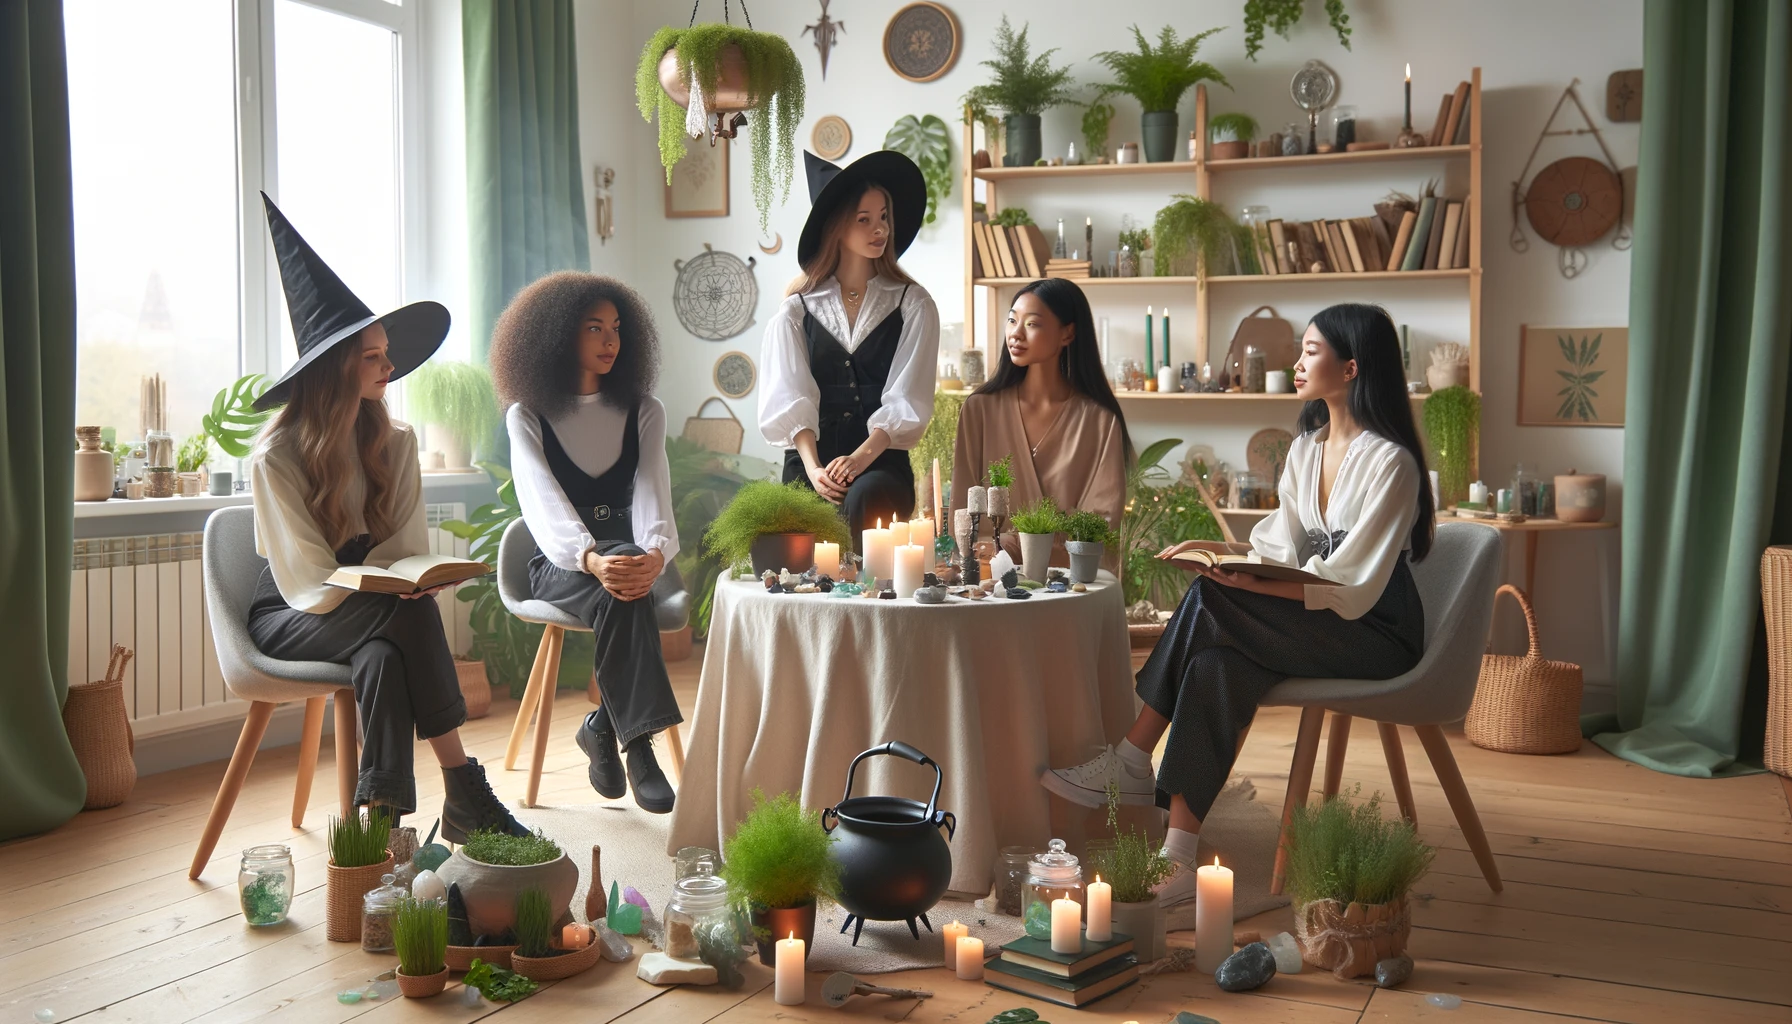 A group of people gathered around a table dressed in witches garb.